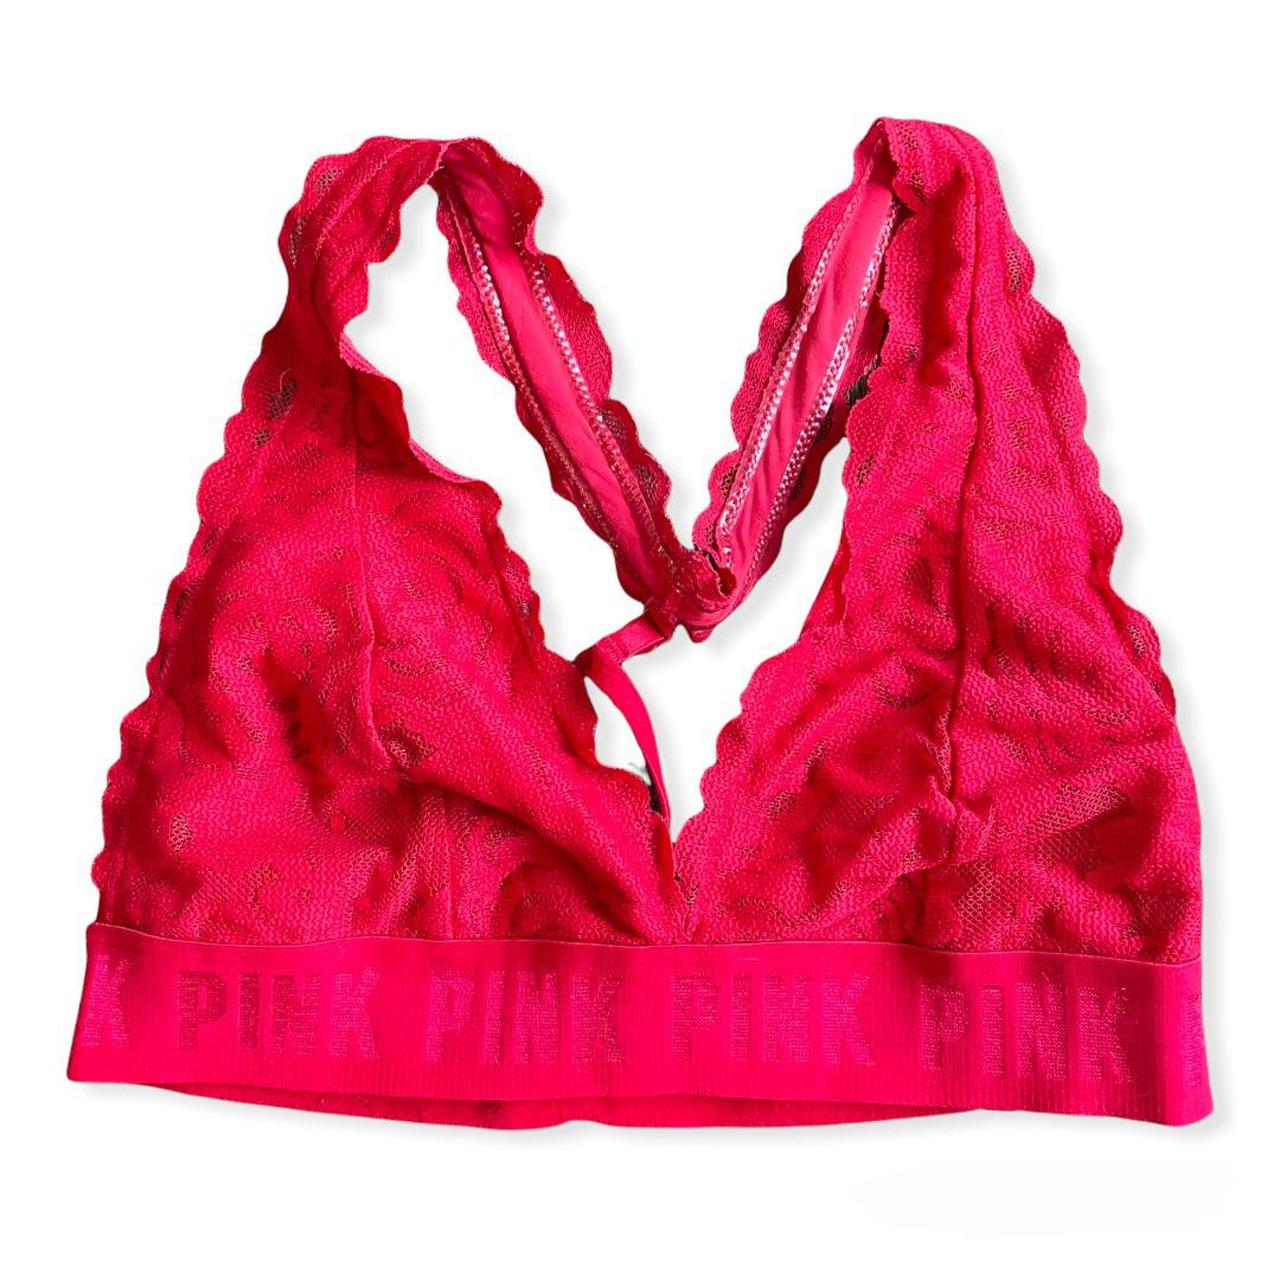 Vibrant red lace bralette from PINK / Victoria’s